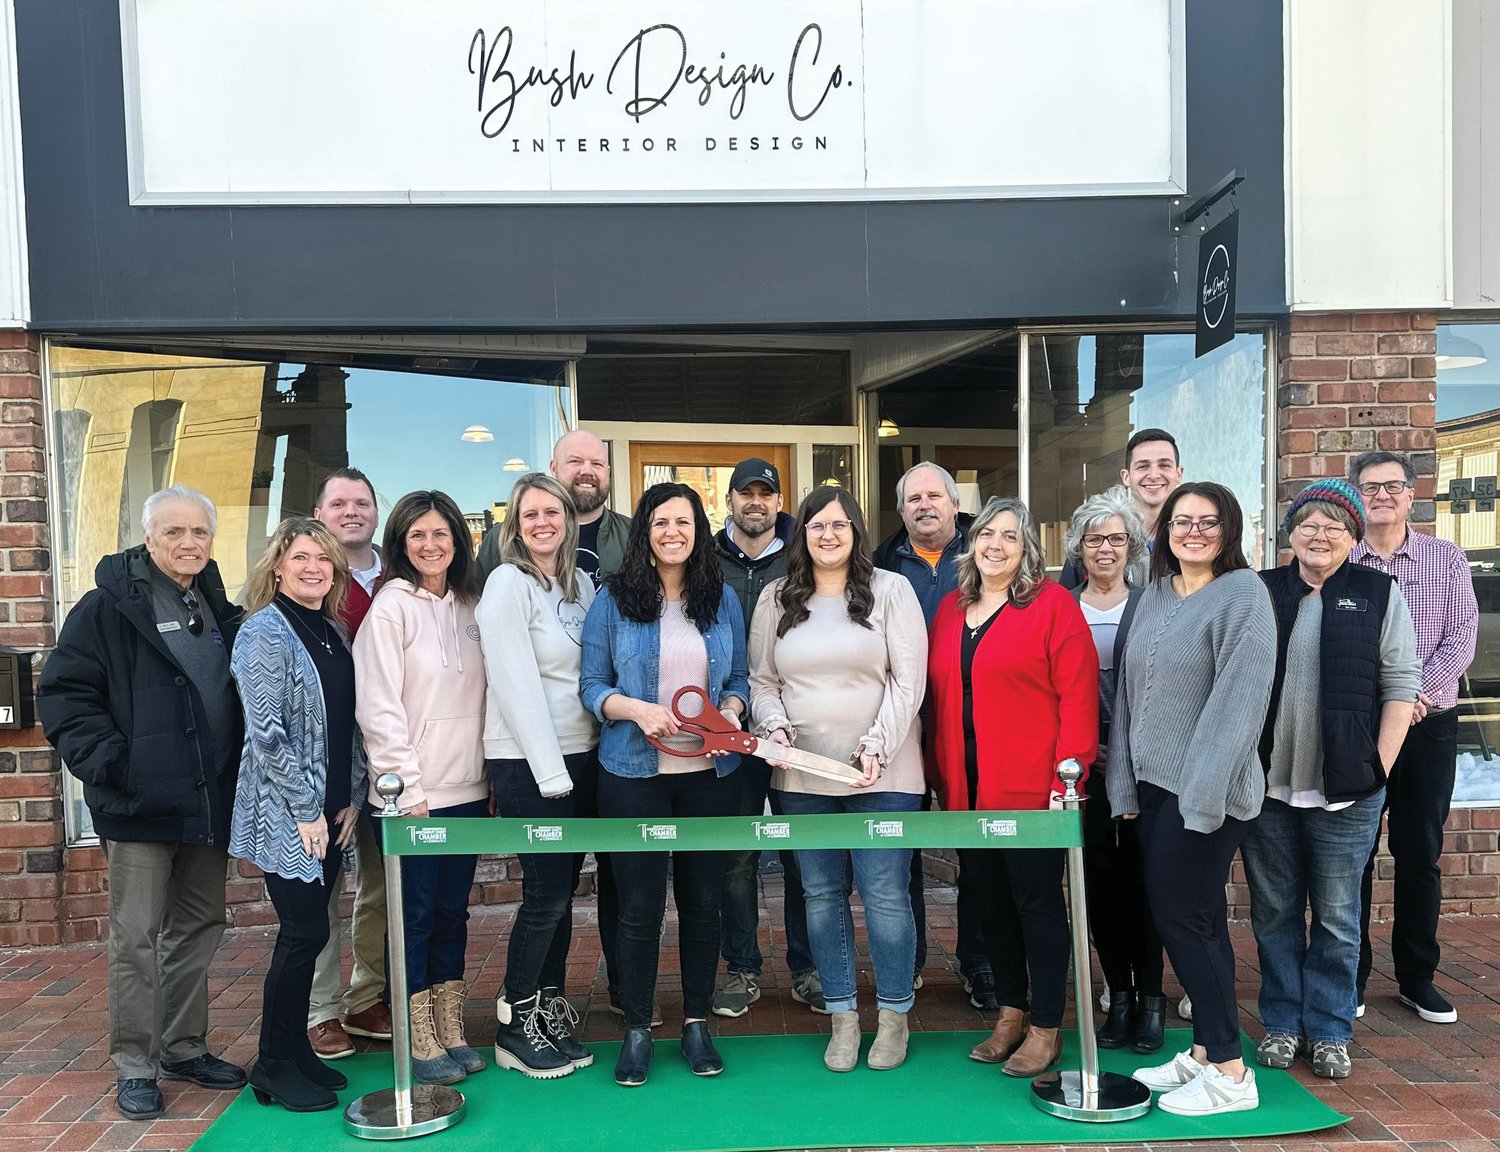 Katie Bush and Lindsey Emmert celebrated a ribbon cutting for their business, Bush Design Co., with members of the Crawfordsville/Montgomery County Chamber of Commerce.